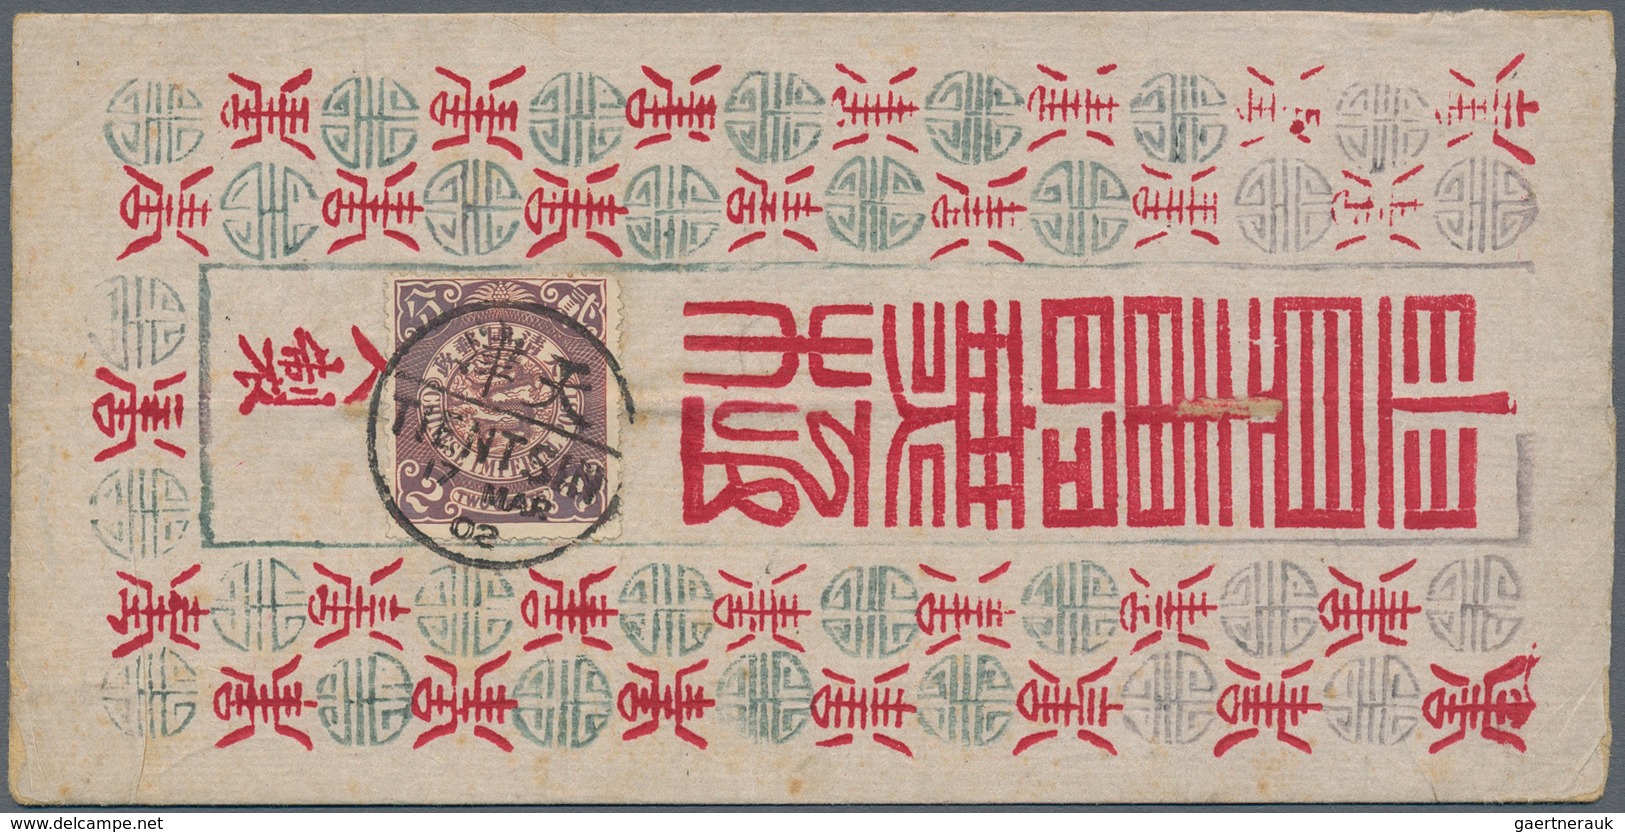 China: 1898/1902, covers (3, one incomplete), ppc (9) with coiling dragons inc. cto and viewsite. In